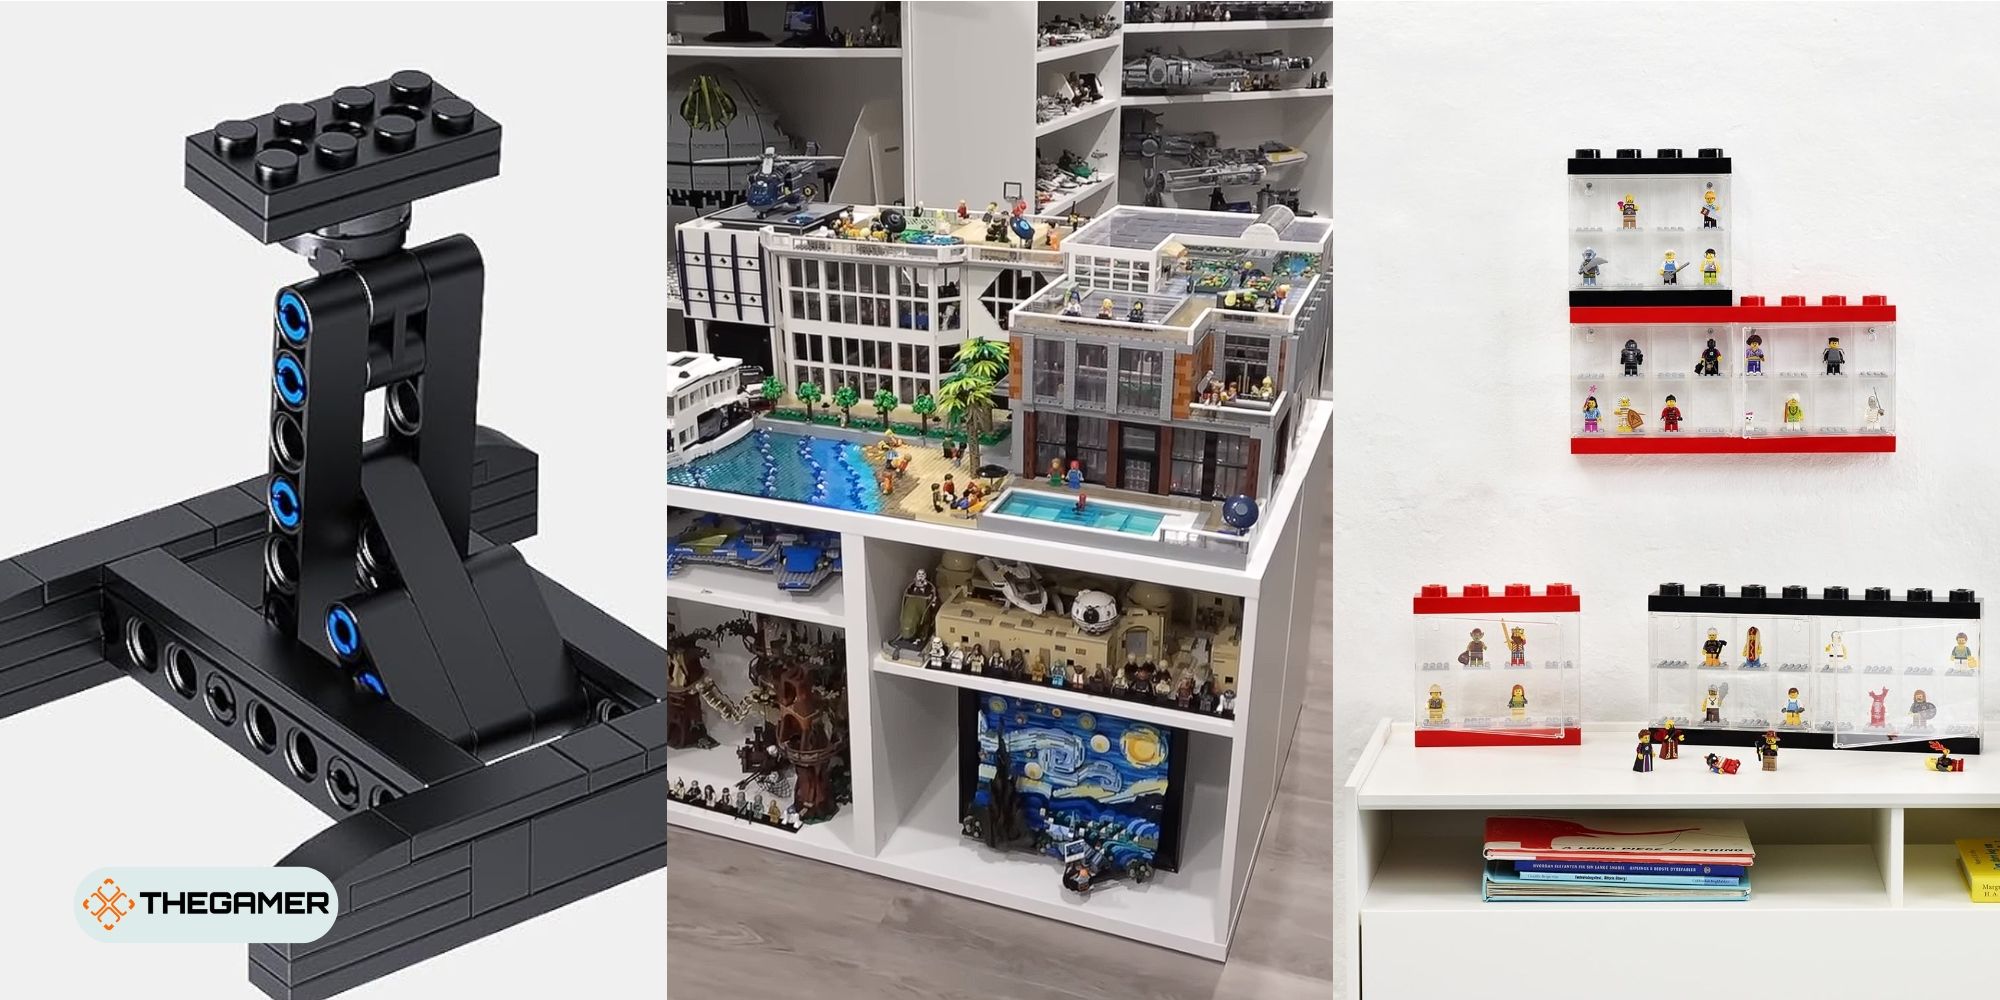 How to Display Lego Sets